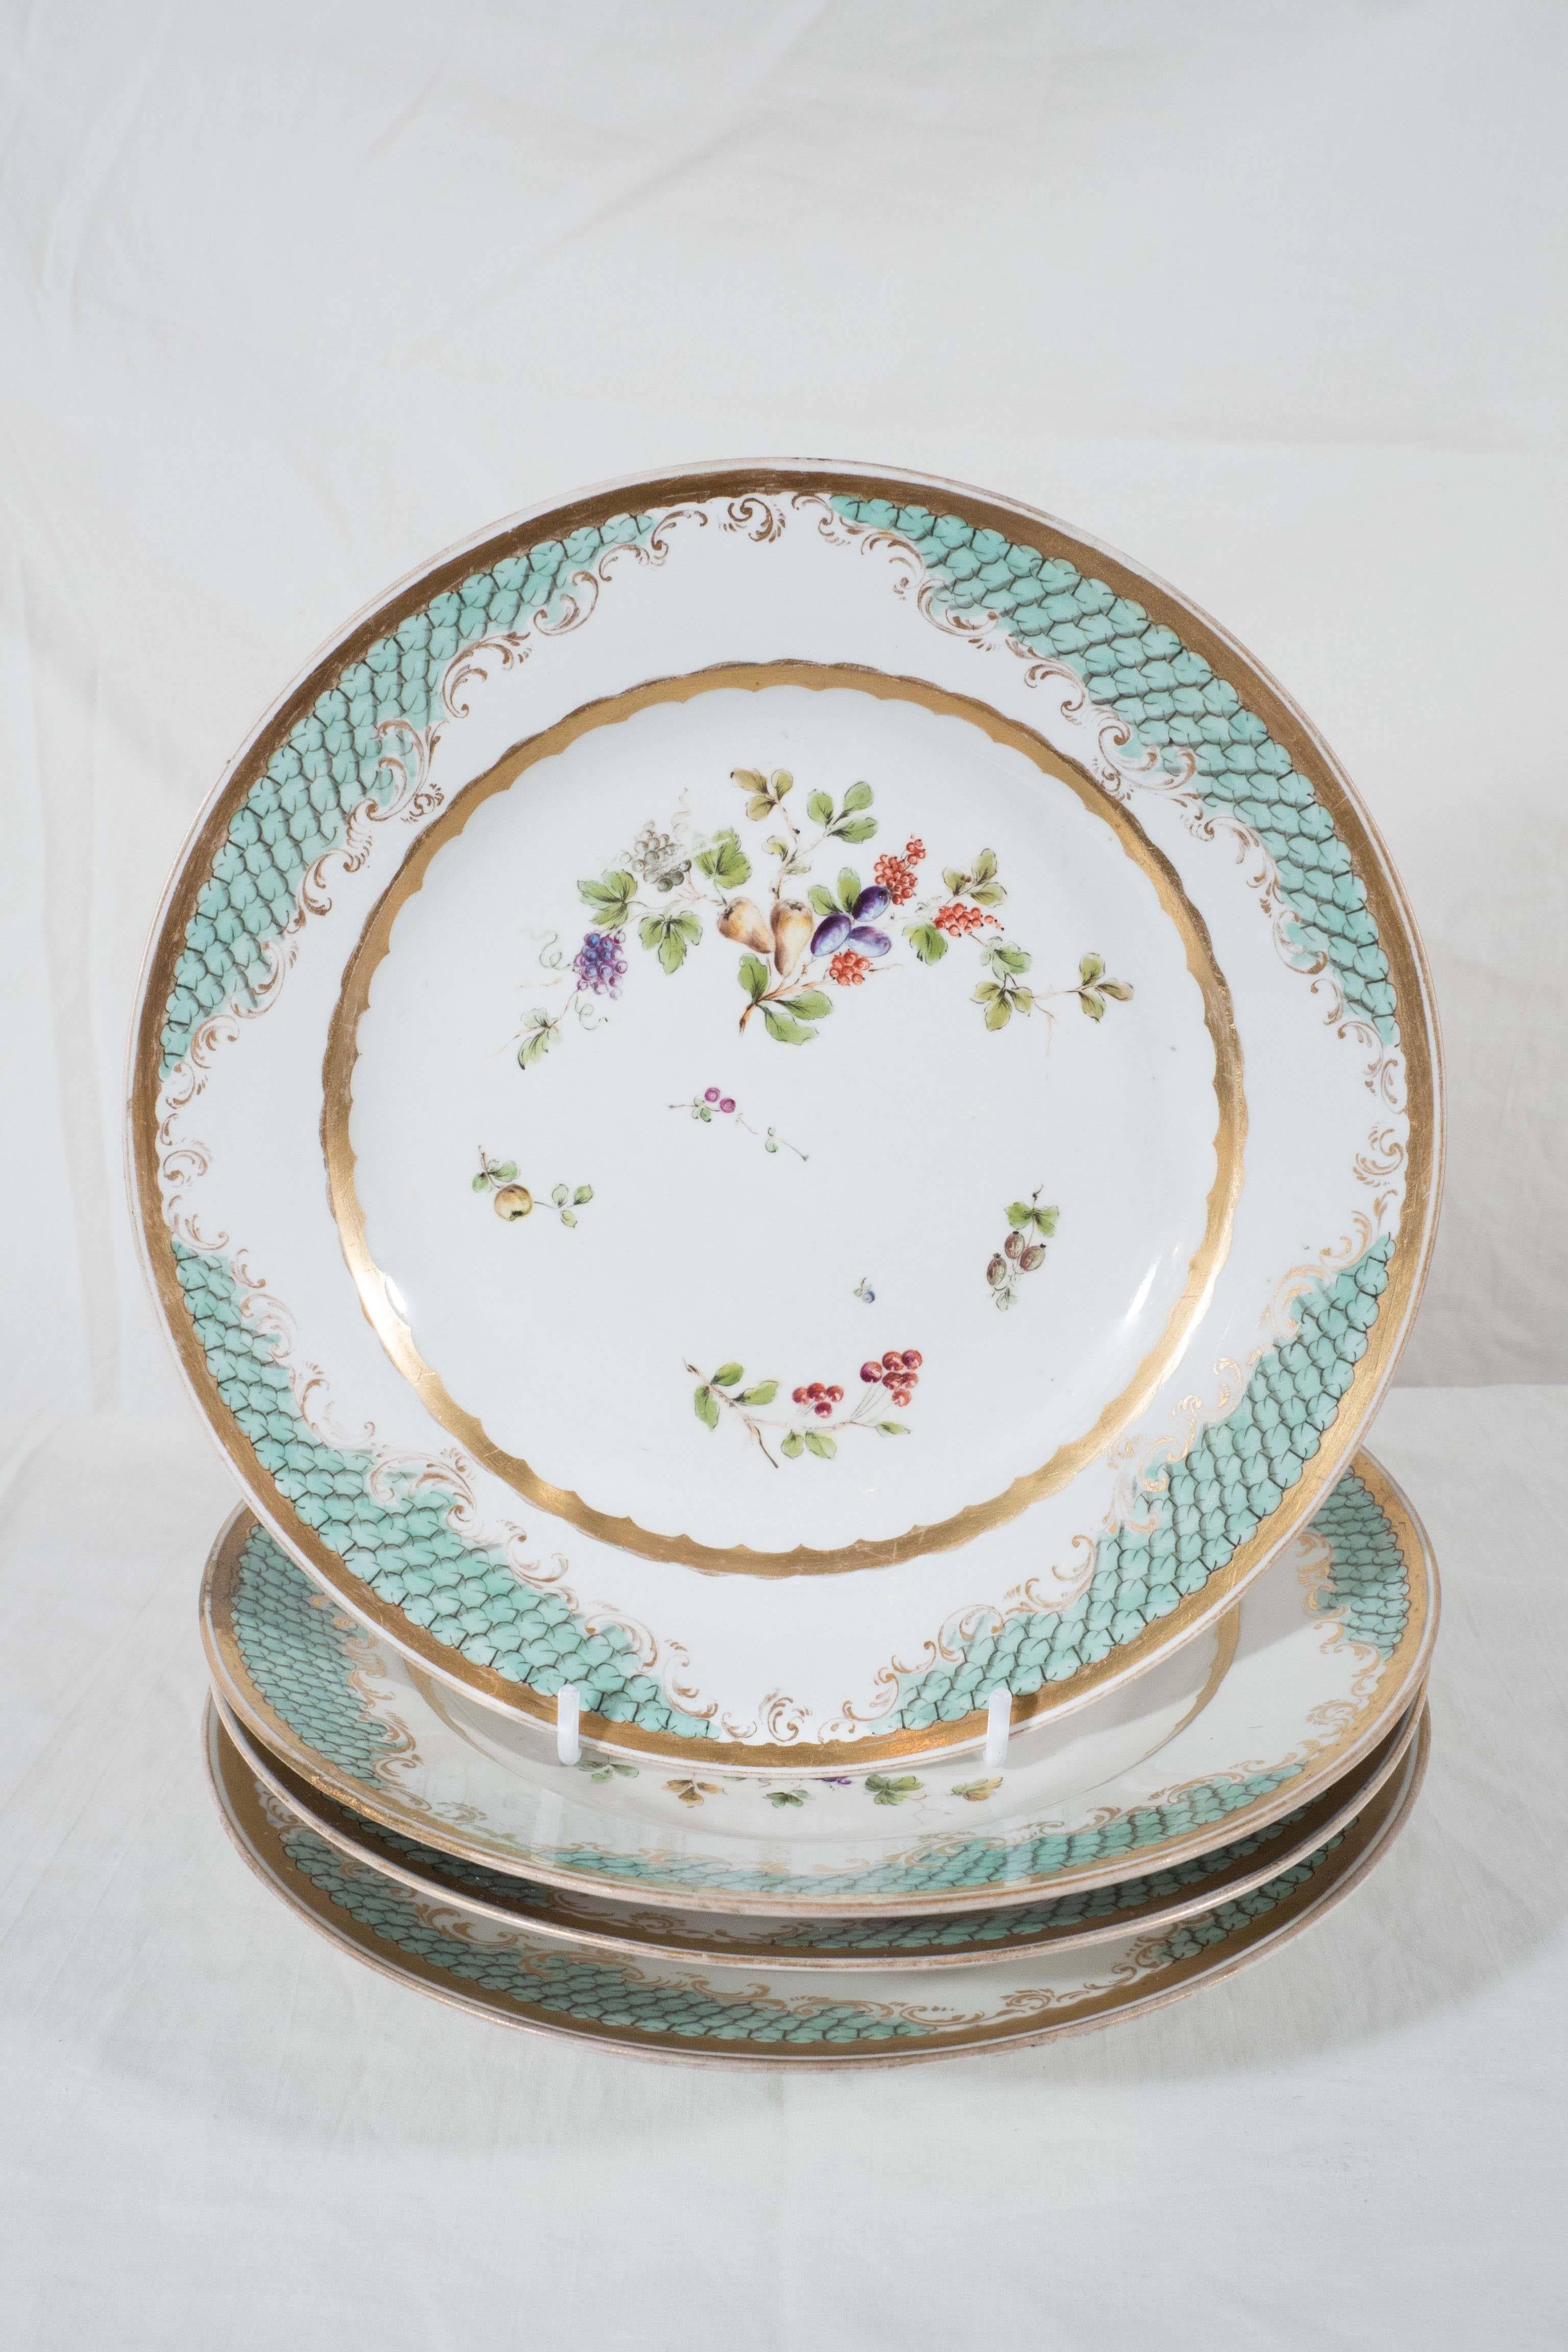 A set of eleven early 19th century dishes. These plates have a beautiful 
seafoam green border. The well is delicately decorated with fruits and flowers framed by a ring of gold.
Made by the Imperial Vienna Porcelain Factory (Royal Vienna